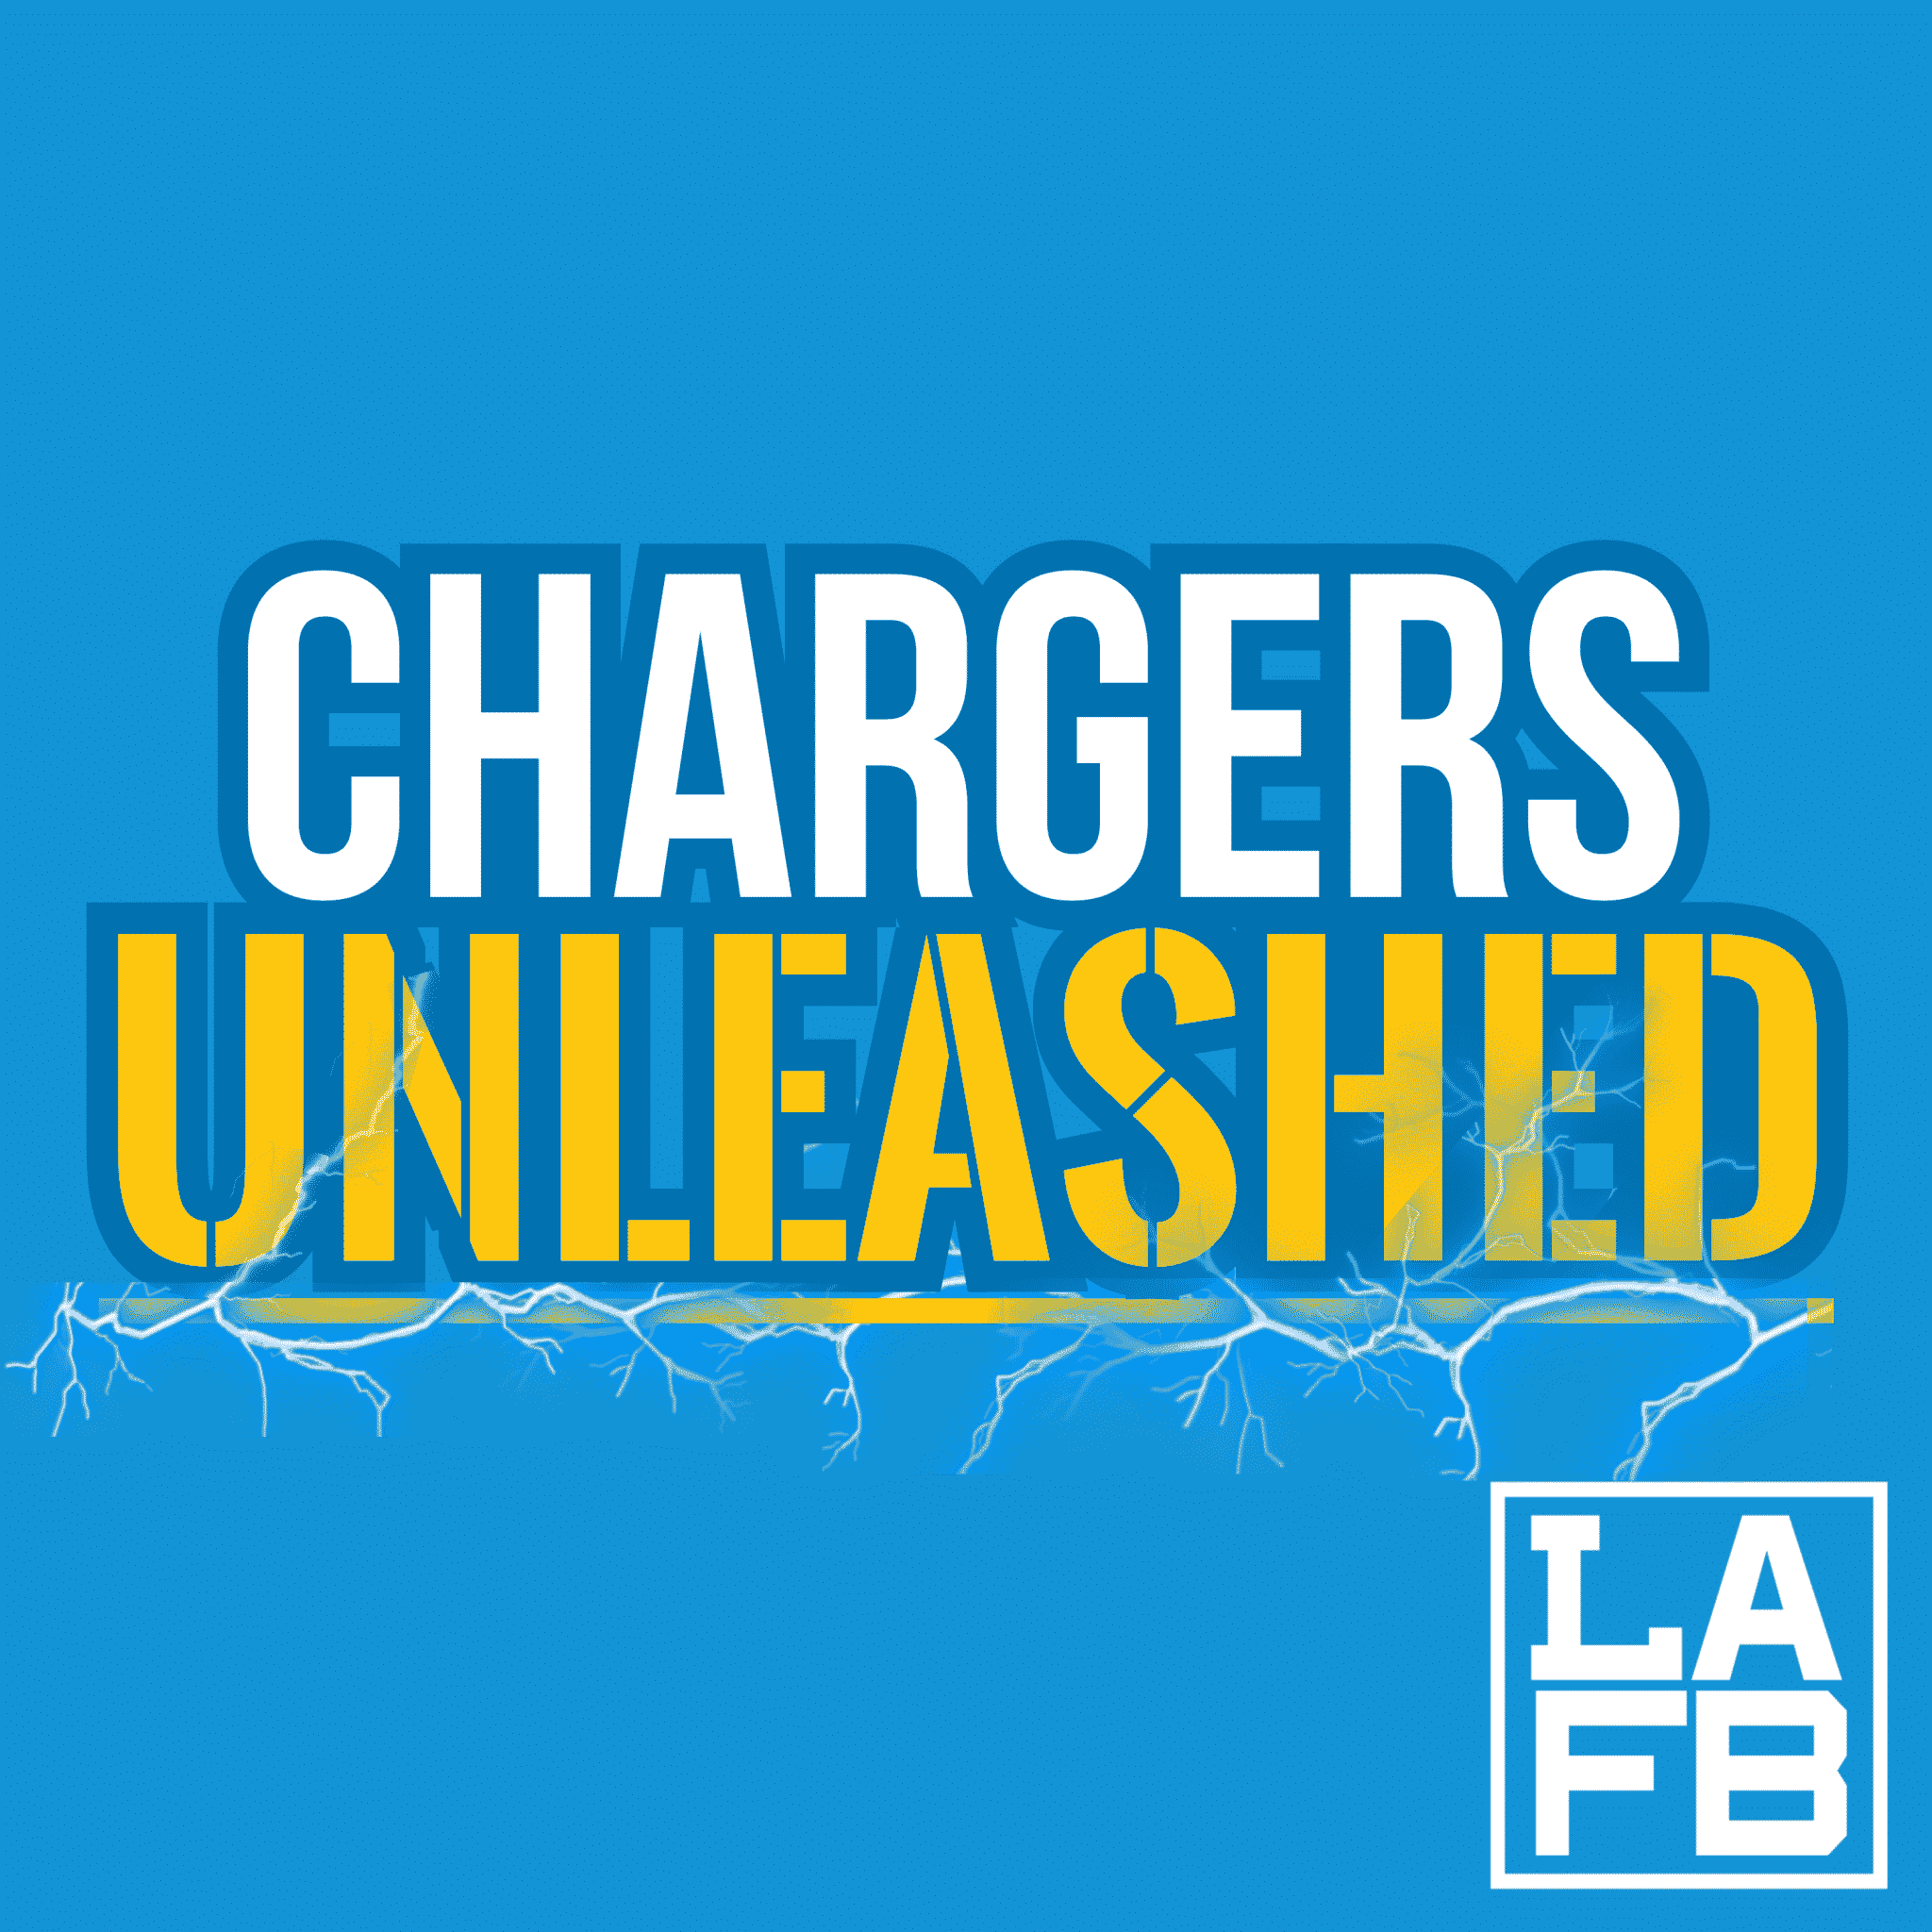 Chargers Unleashed: 2022 Chargers Schedule Release | Justin Herbert Goes Primetime Times Five  – Most In NFL!